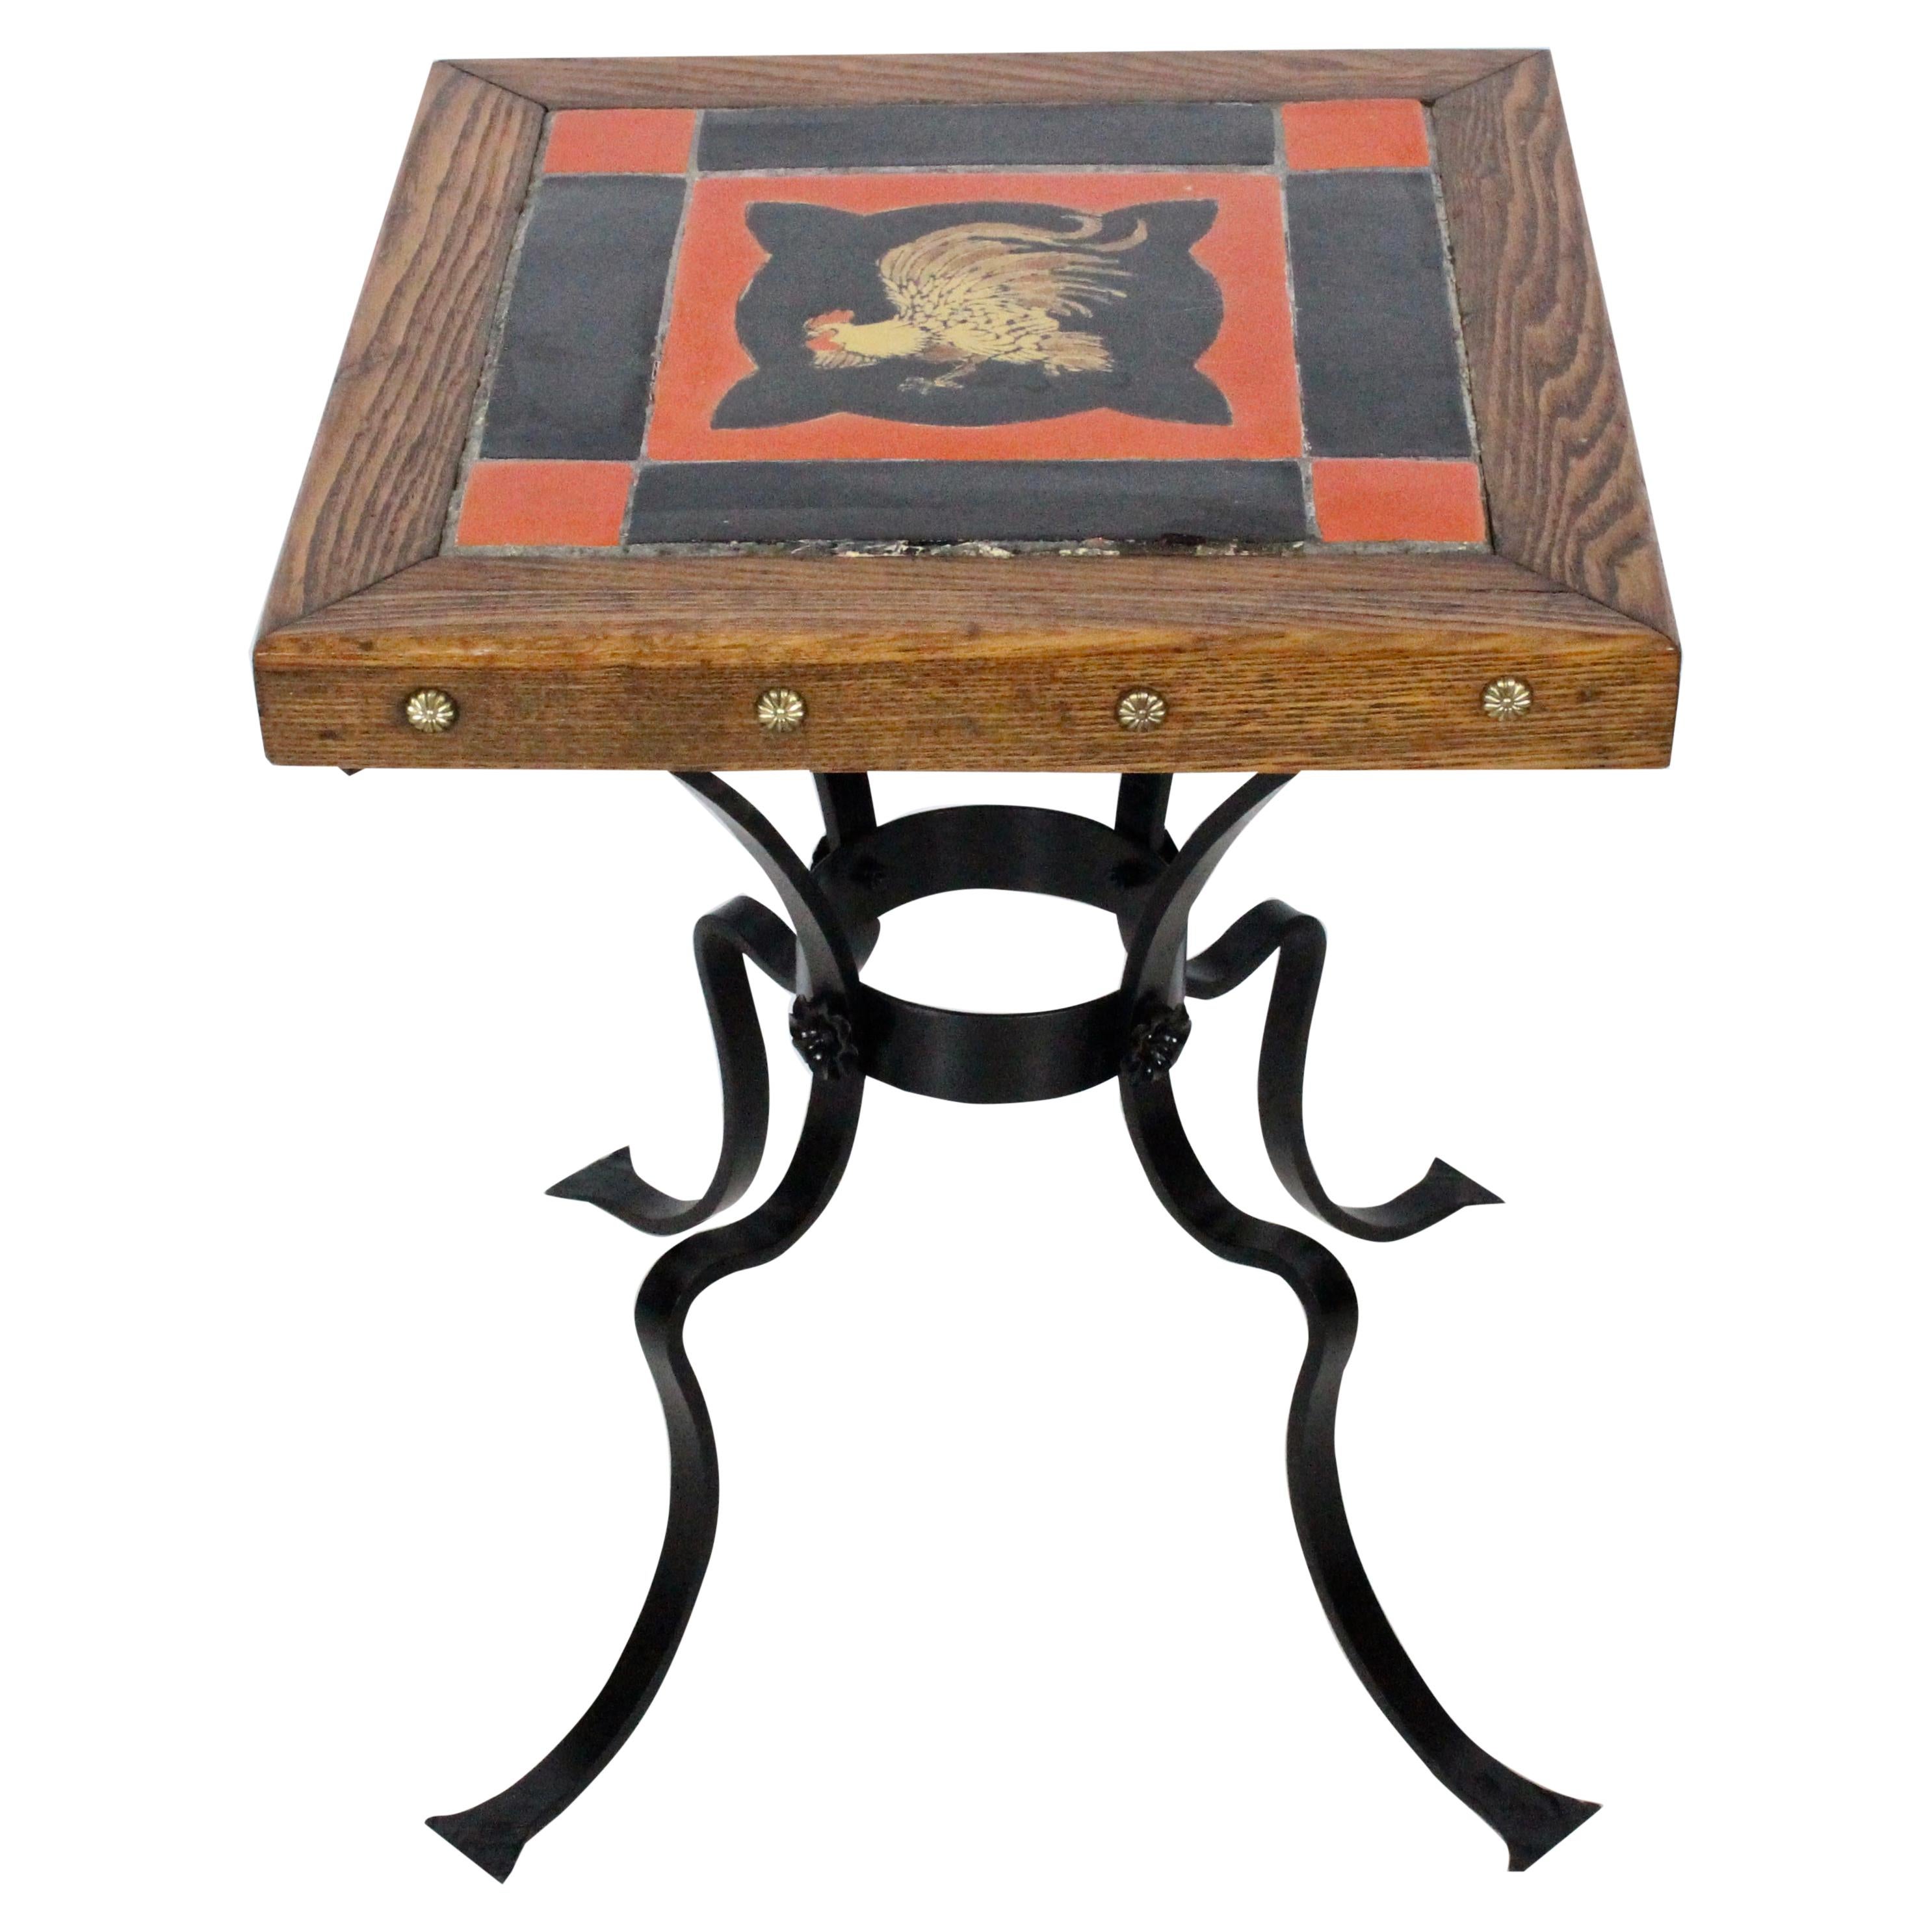 Catalina Style Oak, Ceramic and Wrought Iron "Rooster" Occasional Table, C. 1930